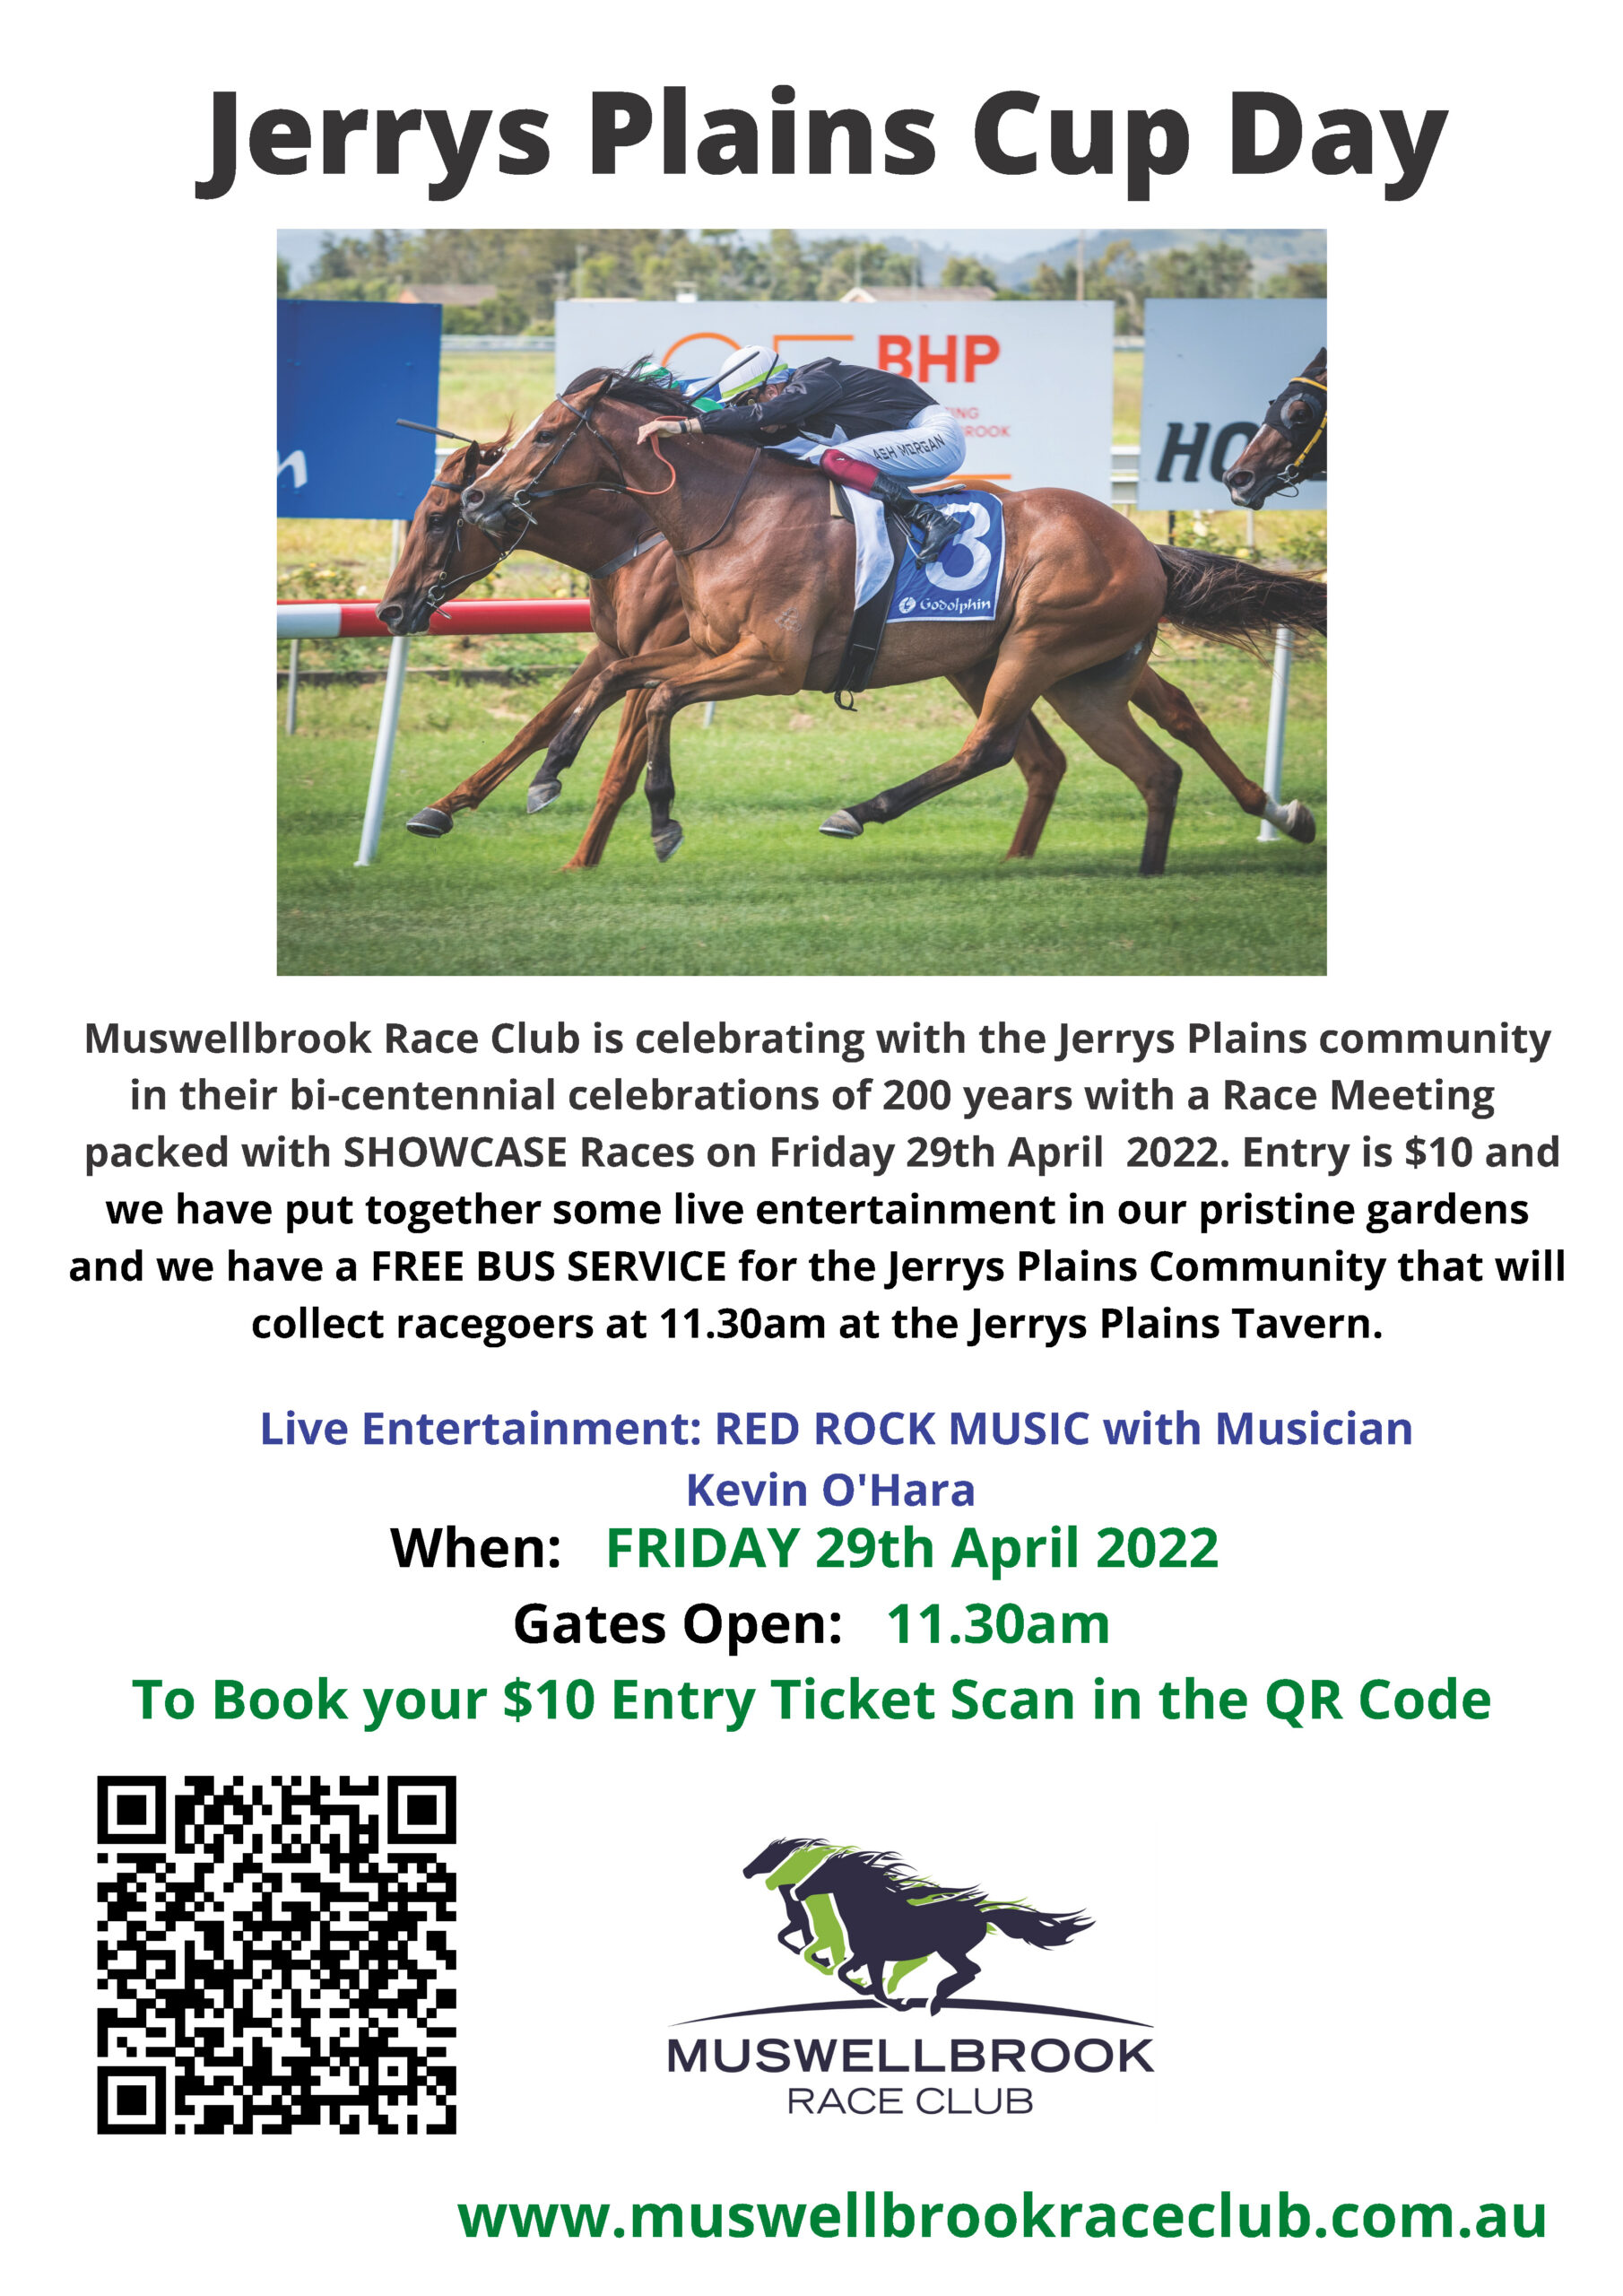 Jerry’s Plains Cup Day